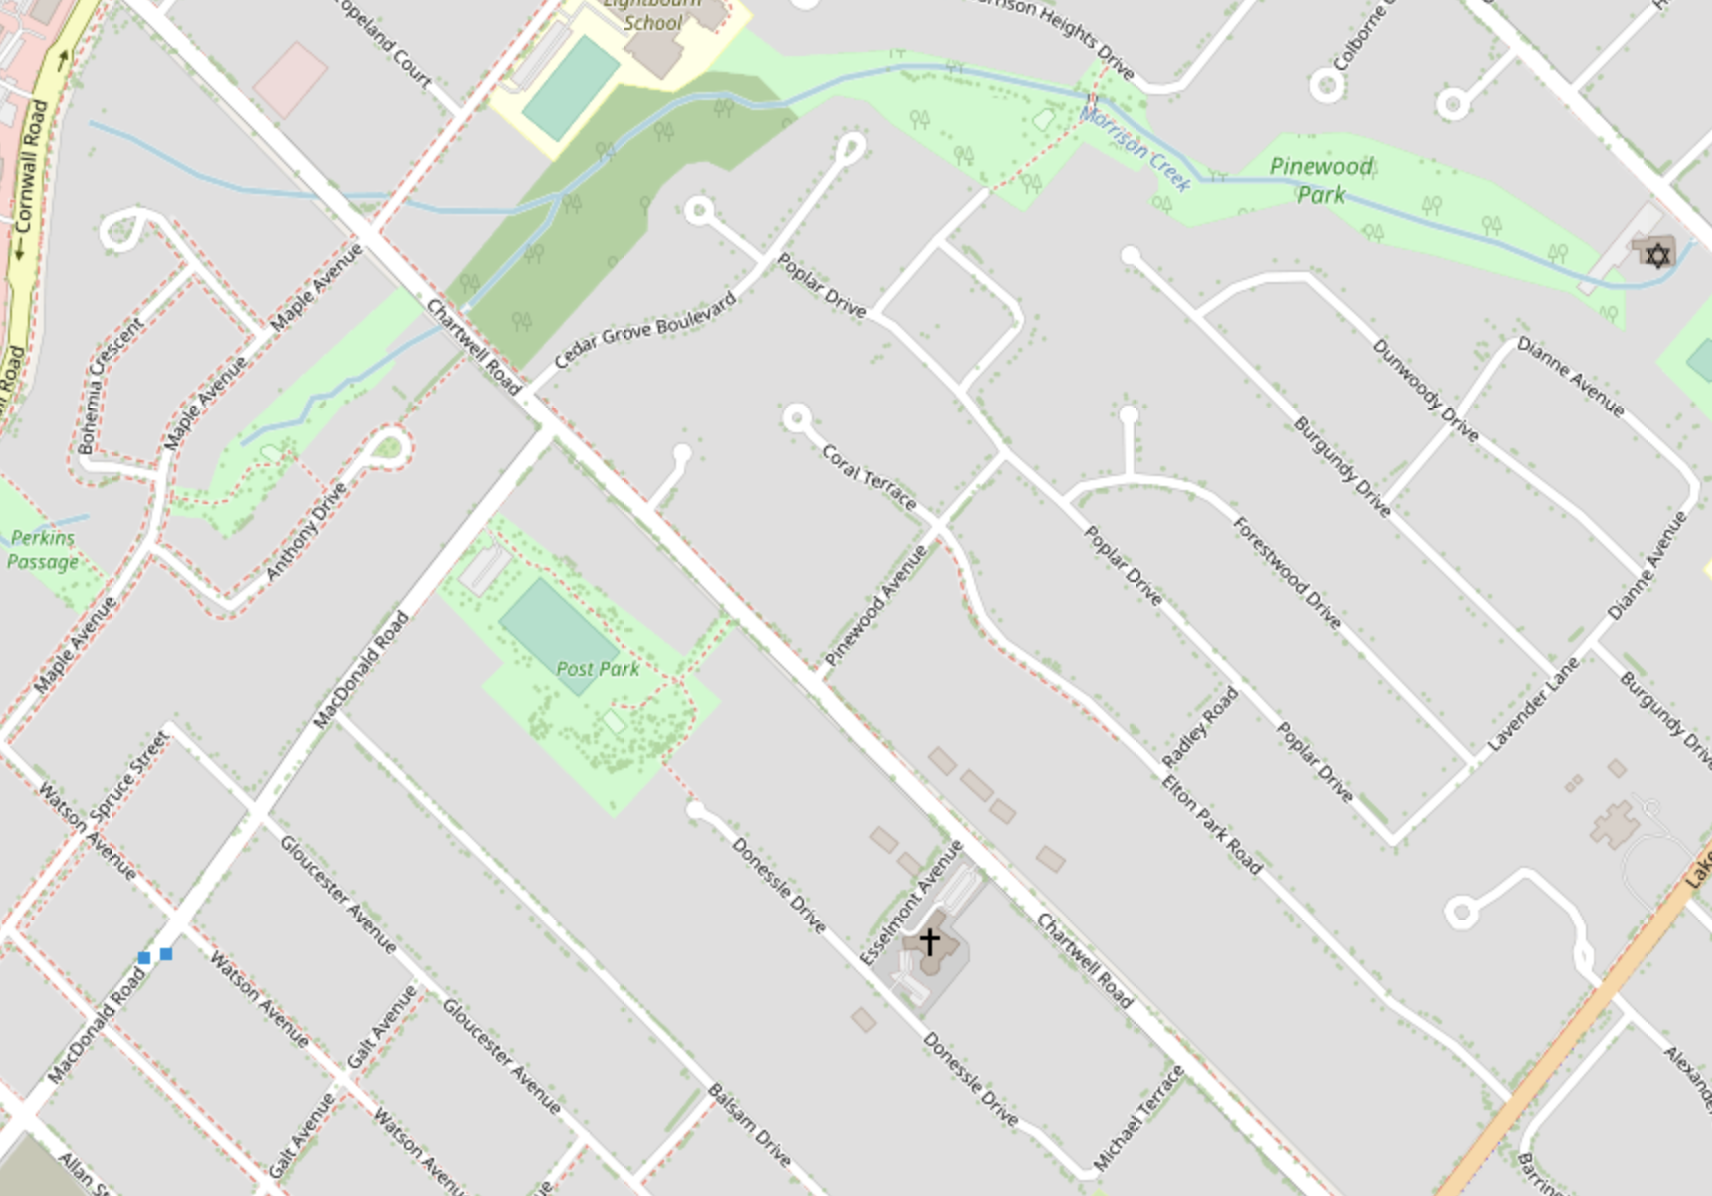 Chartwell Road and Pinewood Avenue | Openstreetmap